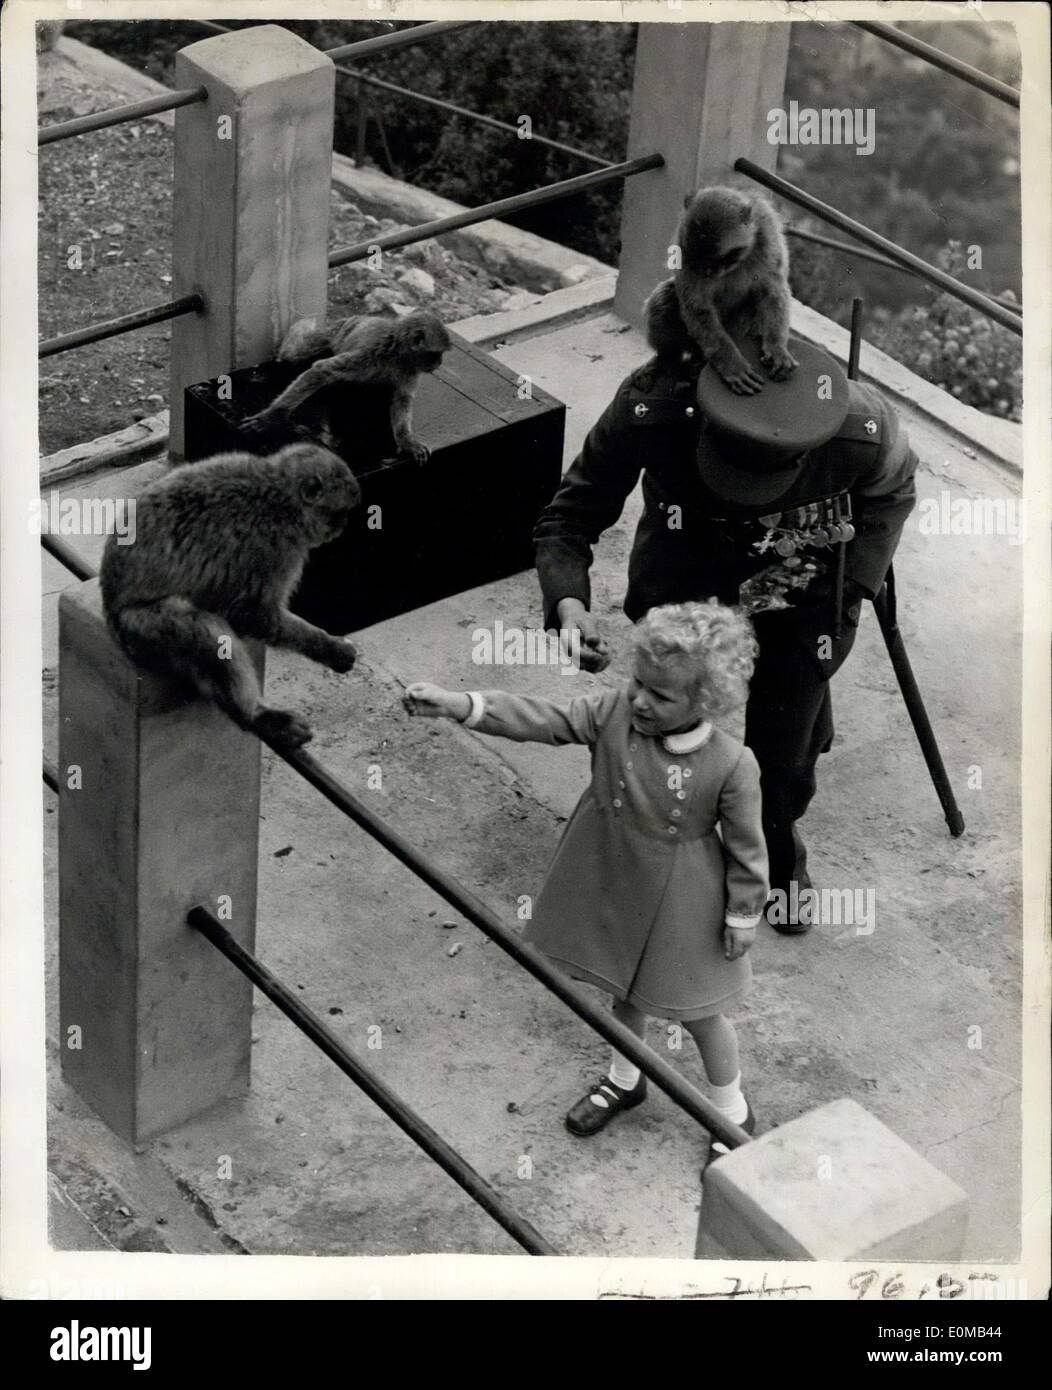 May 12, 1954 - 12-5-54 The Royal children see the Gibraltar apes. Princess Anne has fun. hoto Shows: Princess Anne is Stock Photo